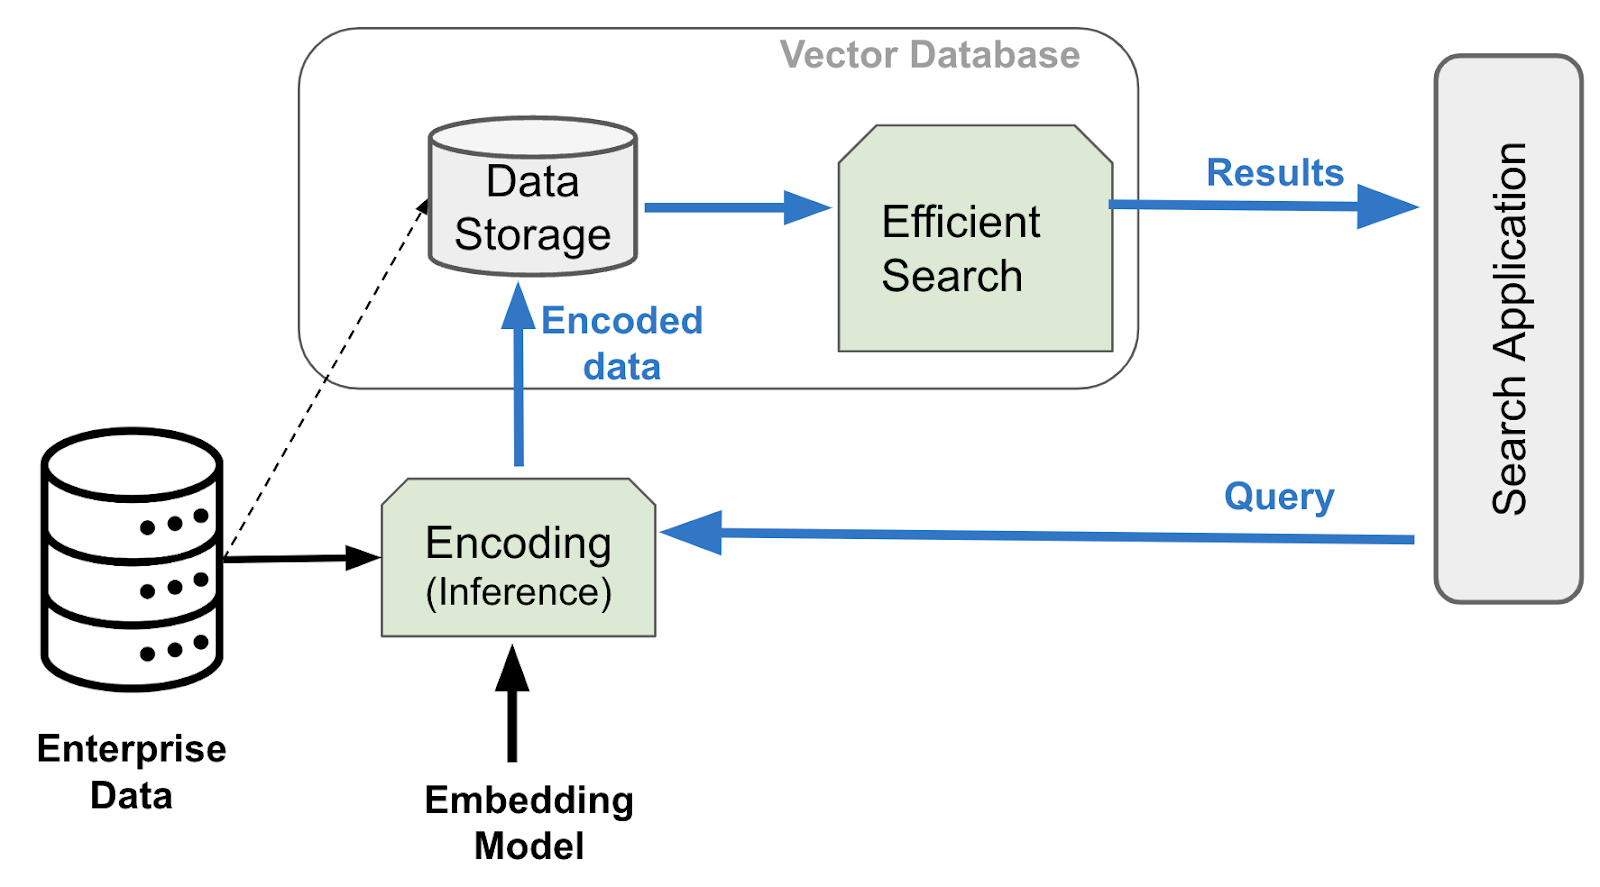 Where a Vector database in an application stack